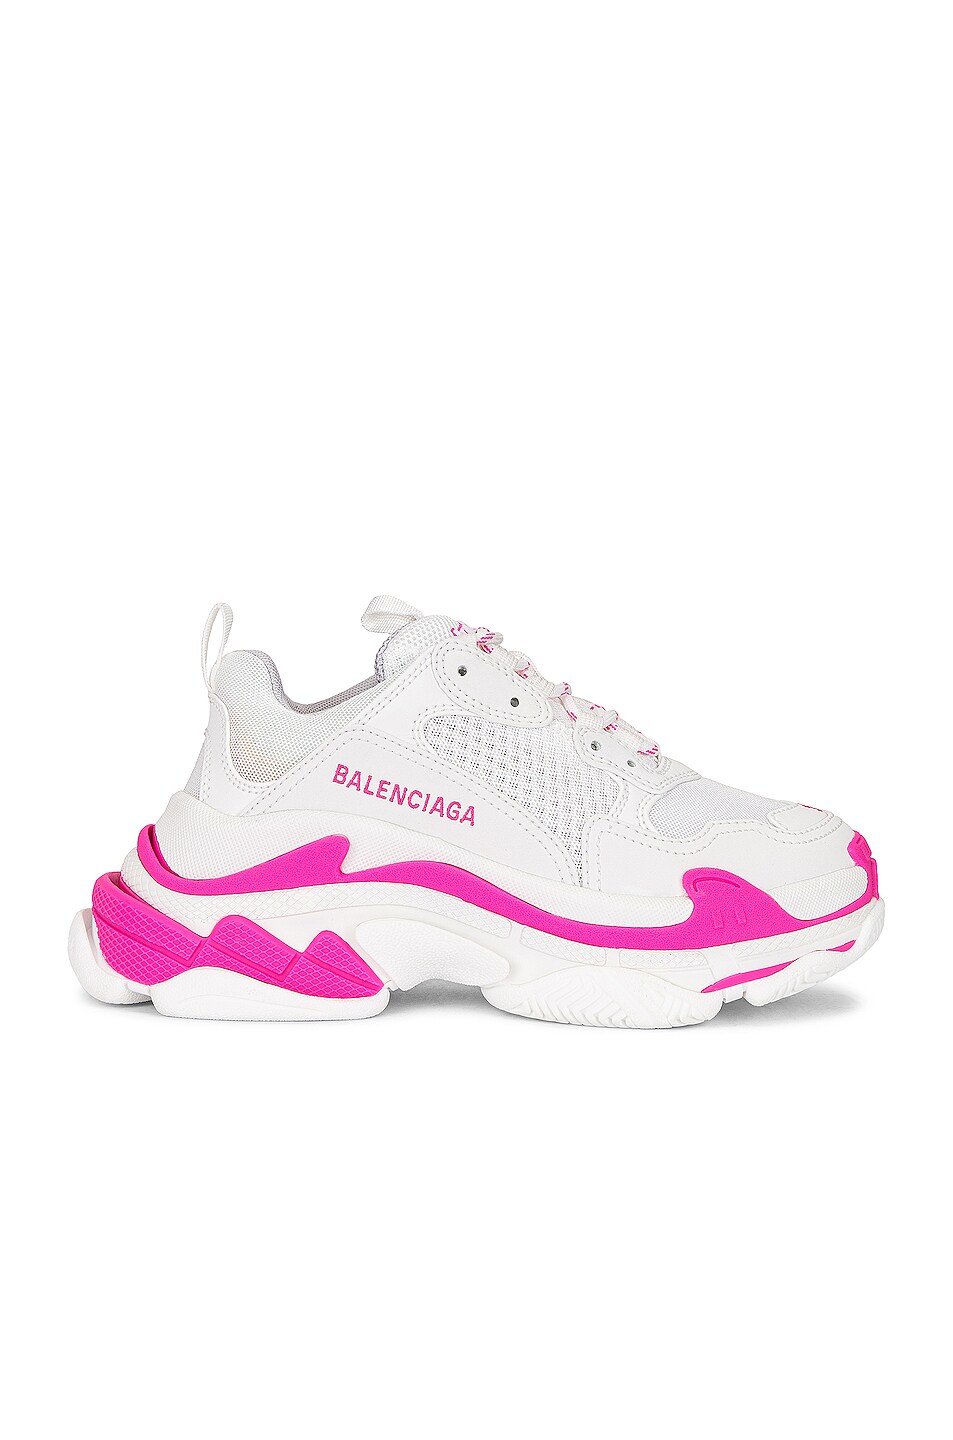 Image 1 of Balenciaga Triple S Sneakers in Fluo Pink & White & Grey